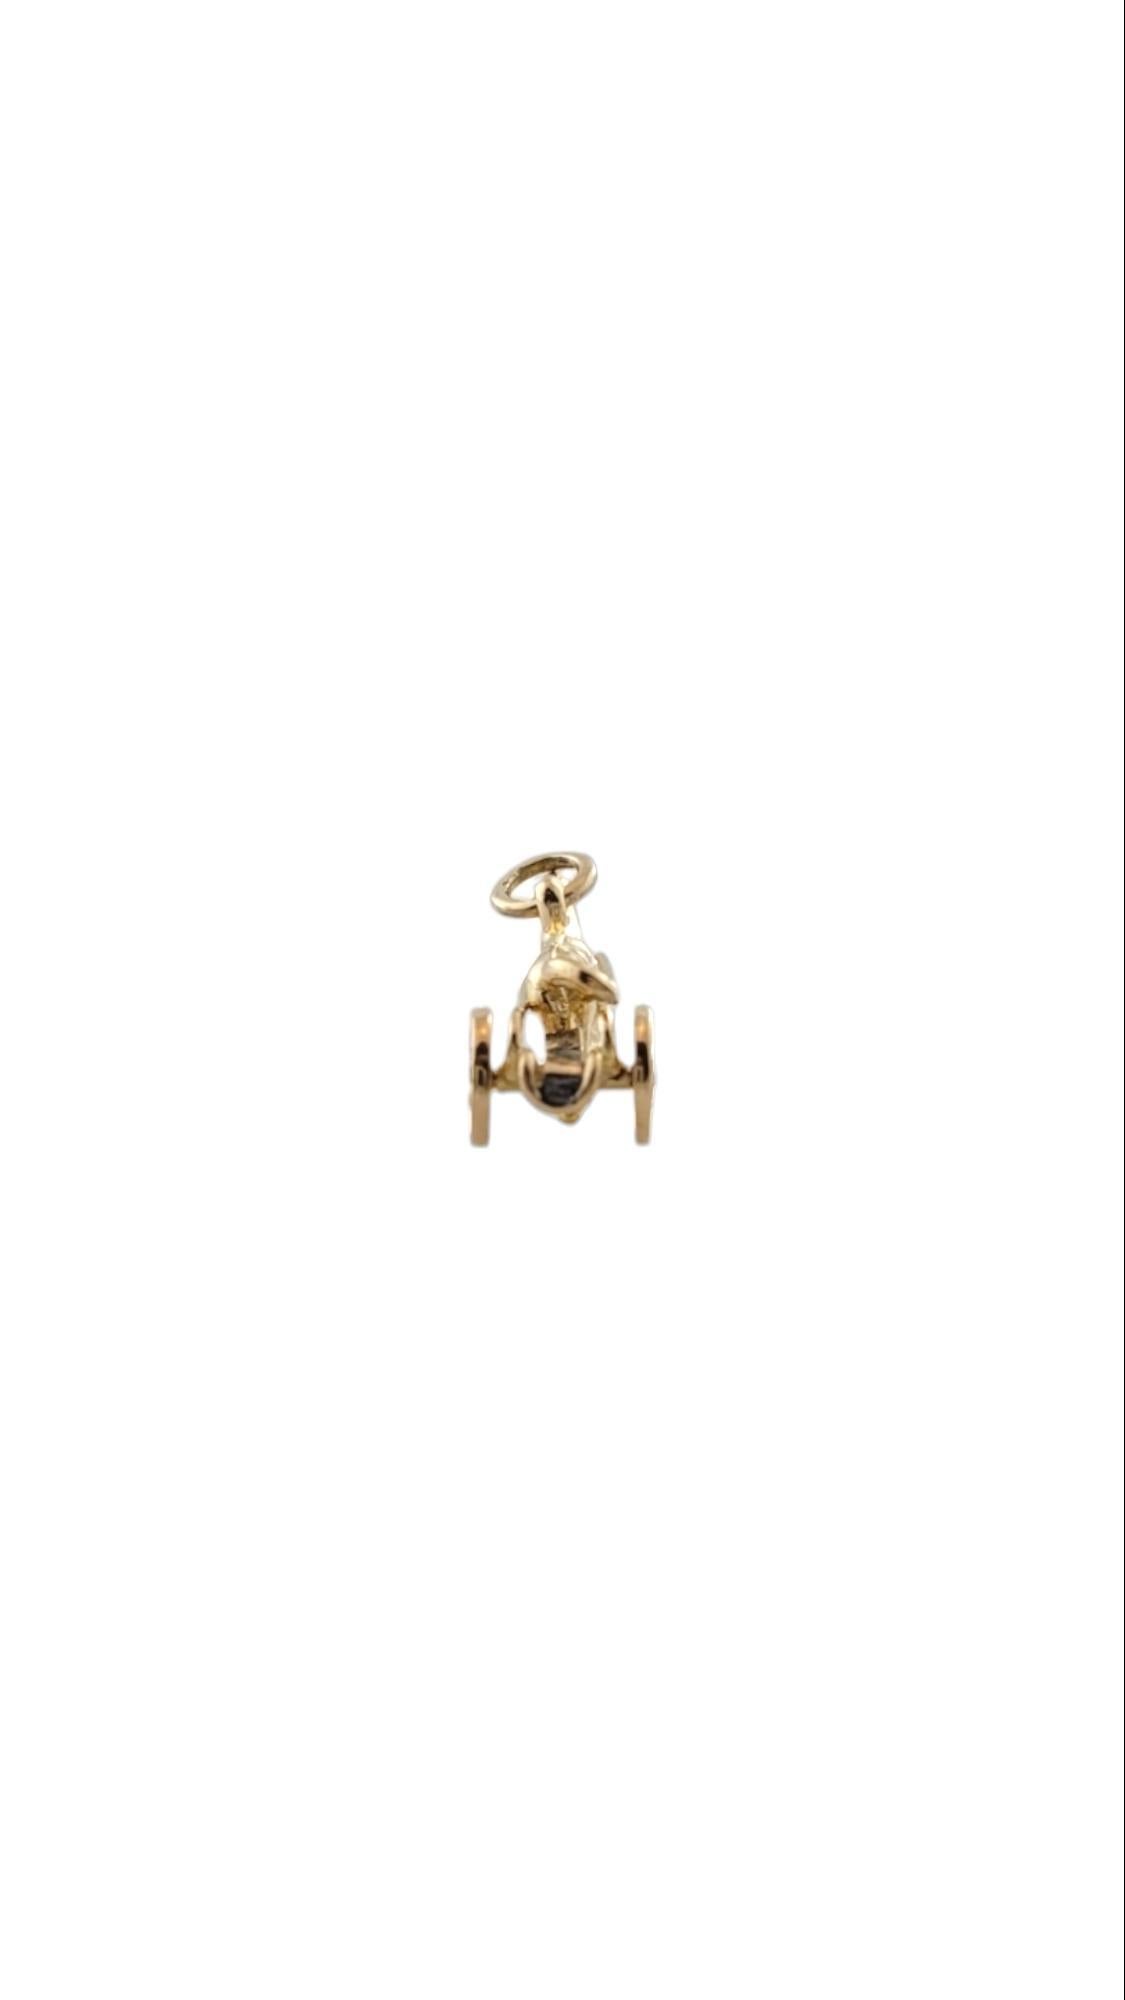 14K Yellow Gold Horse Carriage Charm #15816 In Good Condition For Sale In Washington Depot, CT